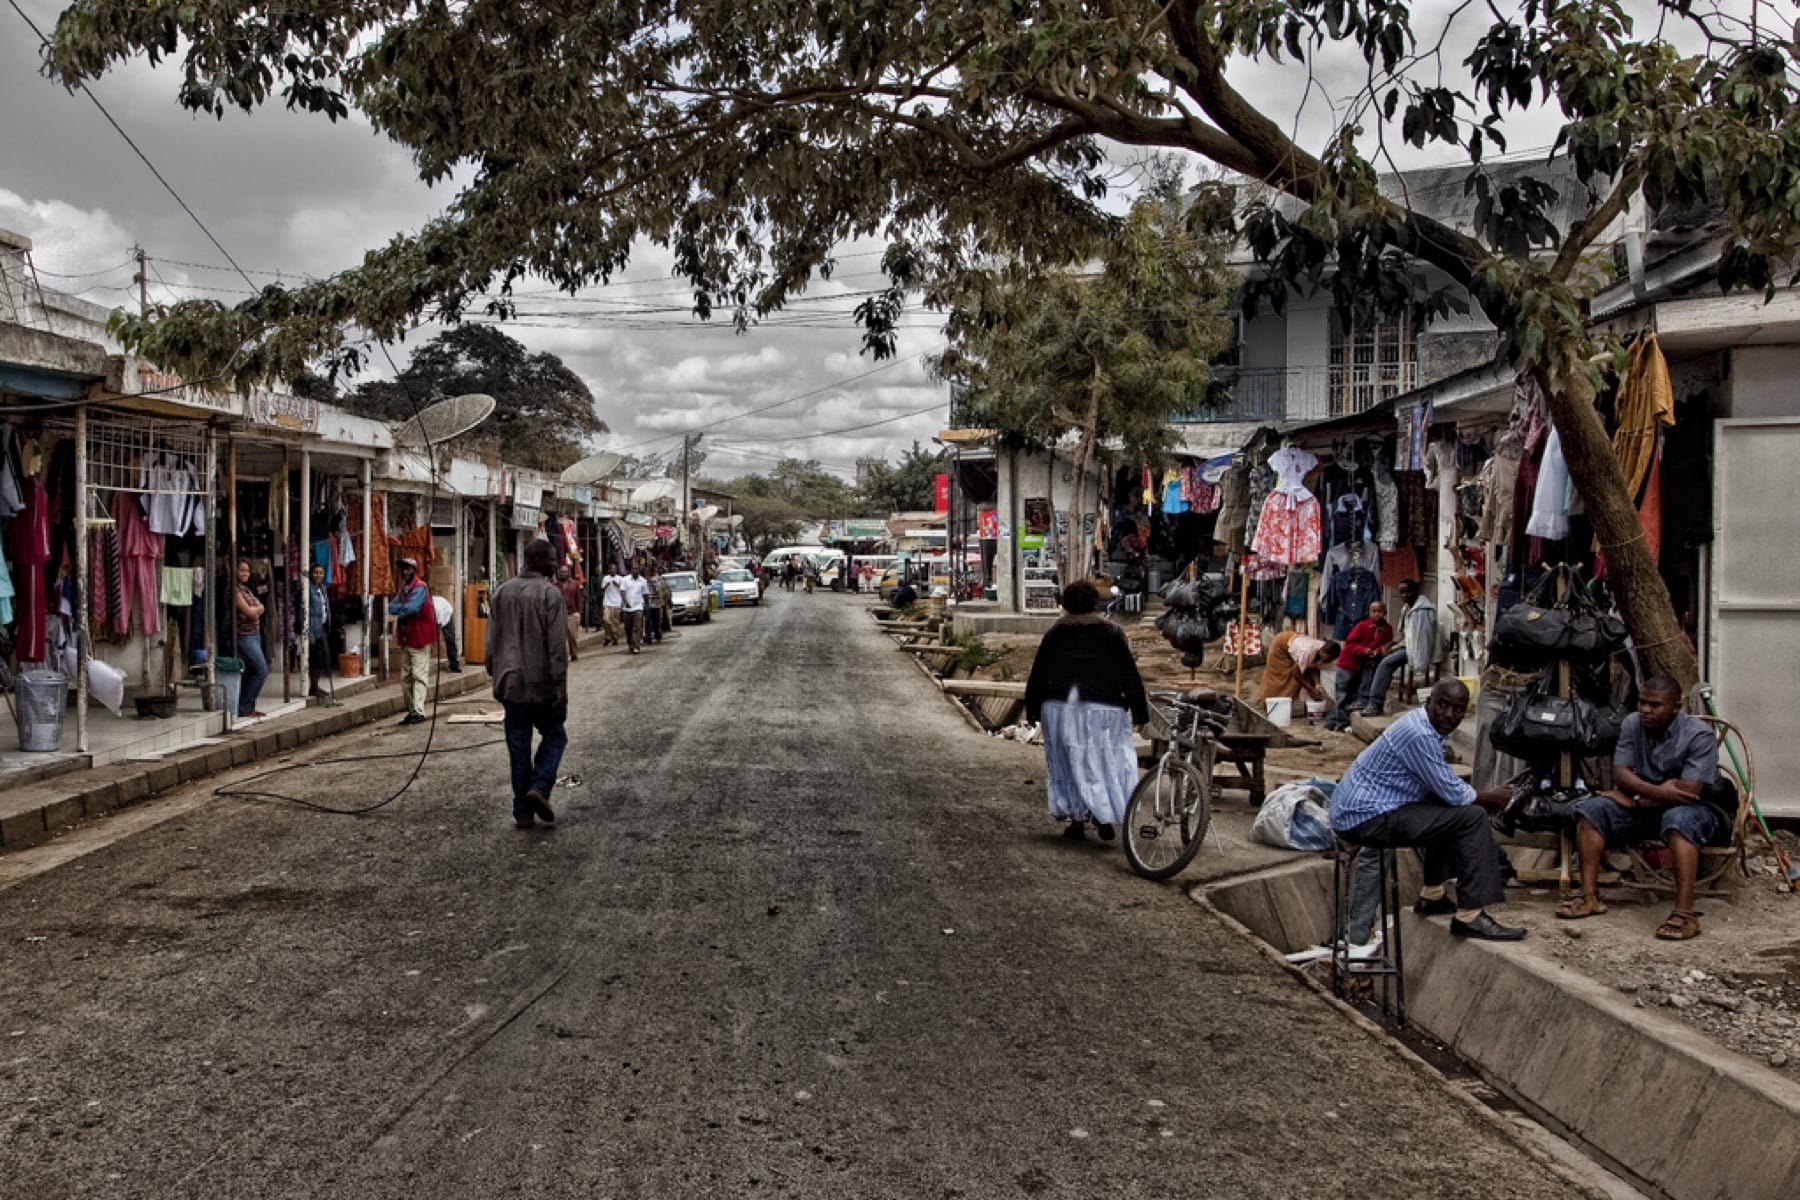 Arusha may not be safe for solo travellers